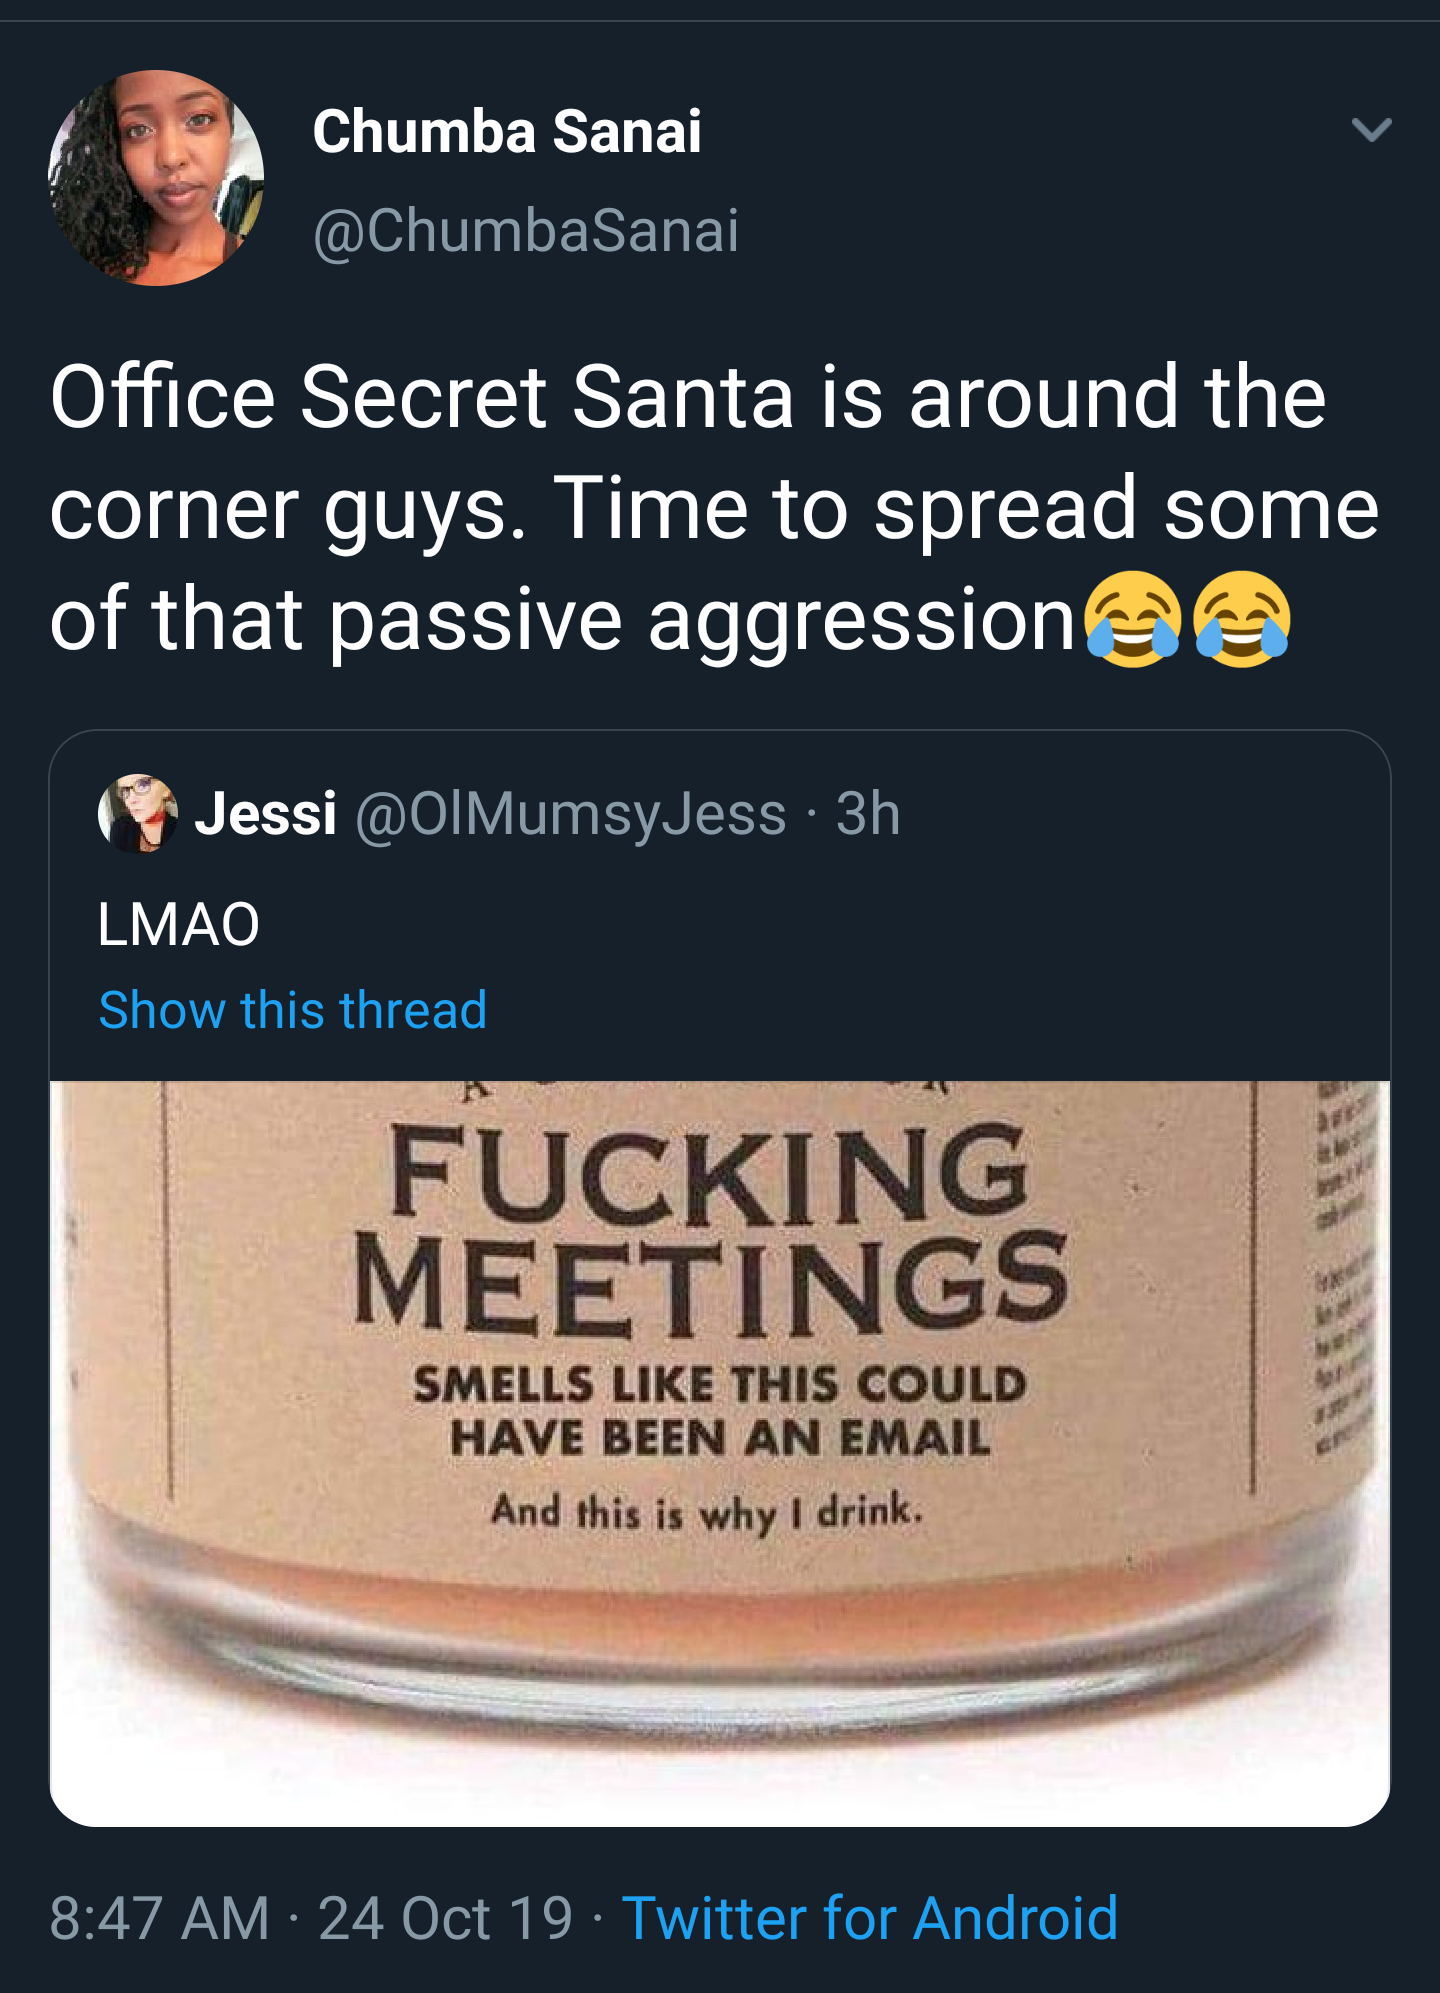 polaris office - Chumba Sanai Office Secret Santa is around the corner guys. Time to spread some of that passive aggression Jessi 3h Lmao Show this thread Fucking Meetings Smells This Could Have Been An Email And this is why I drink. 24 Oct 19. Twitter fo